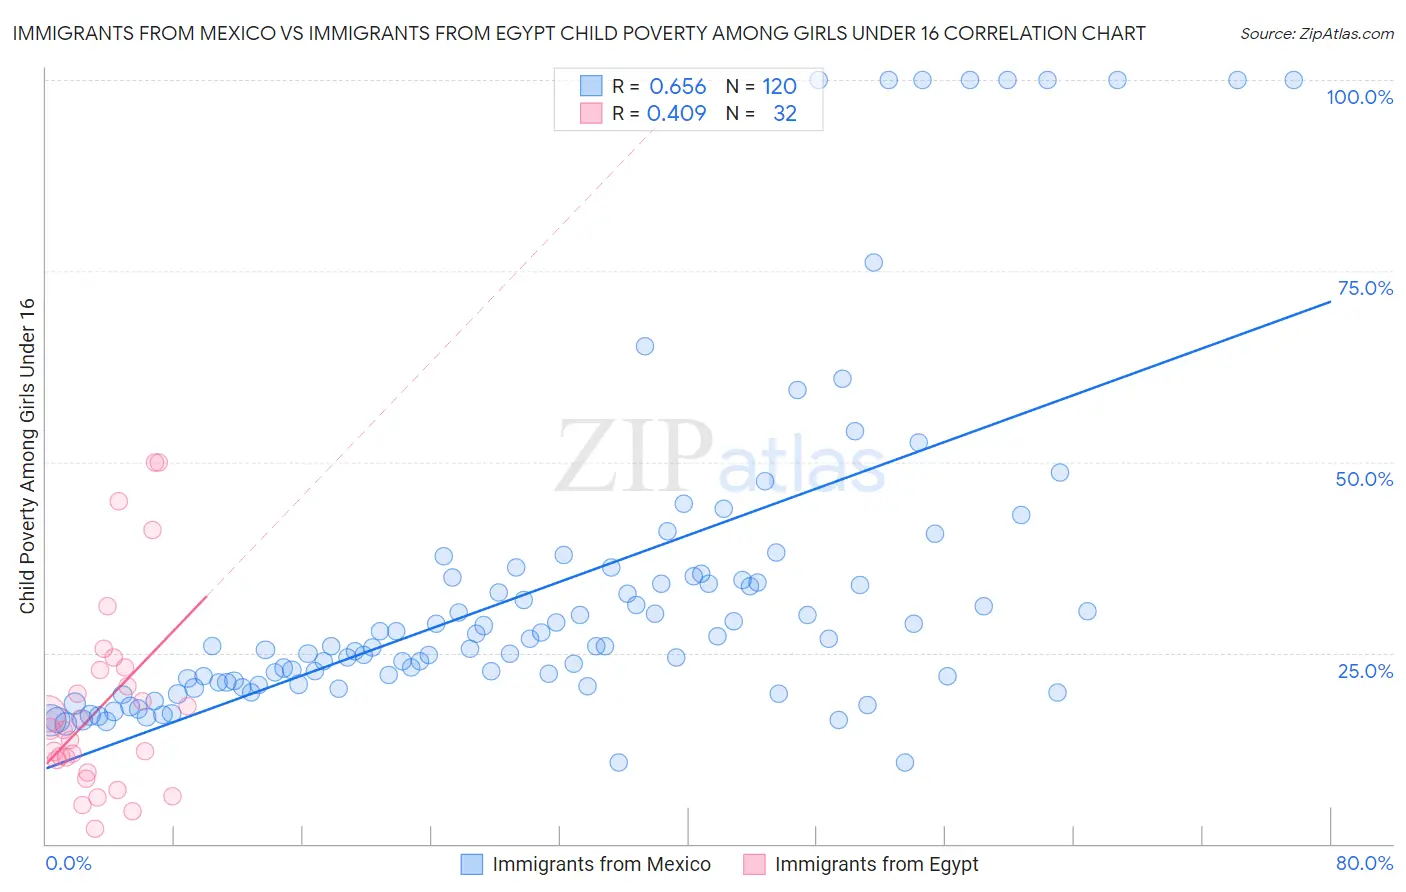 Immigrants from Mexico vs Immigrants from Egypt Child Poverty Among Girls Under 16